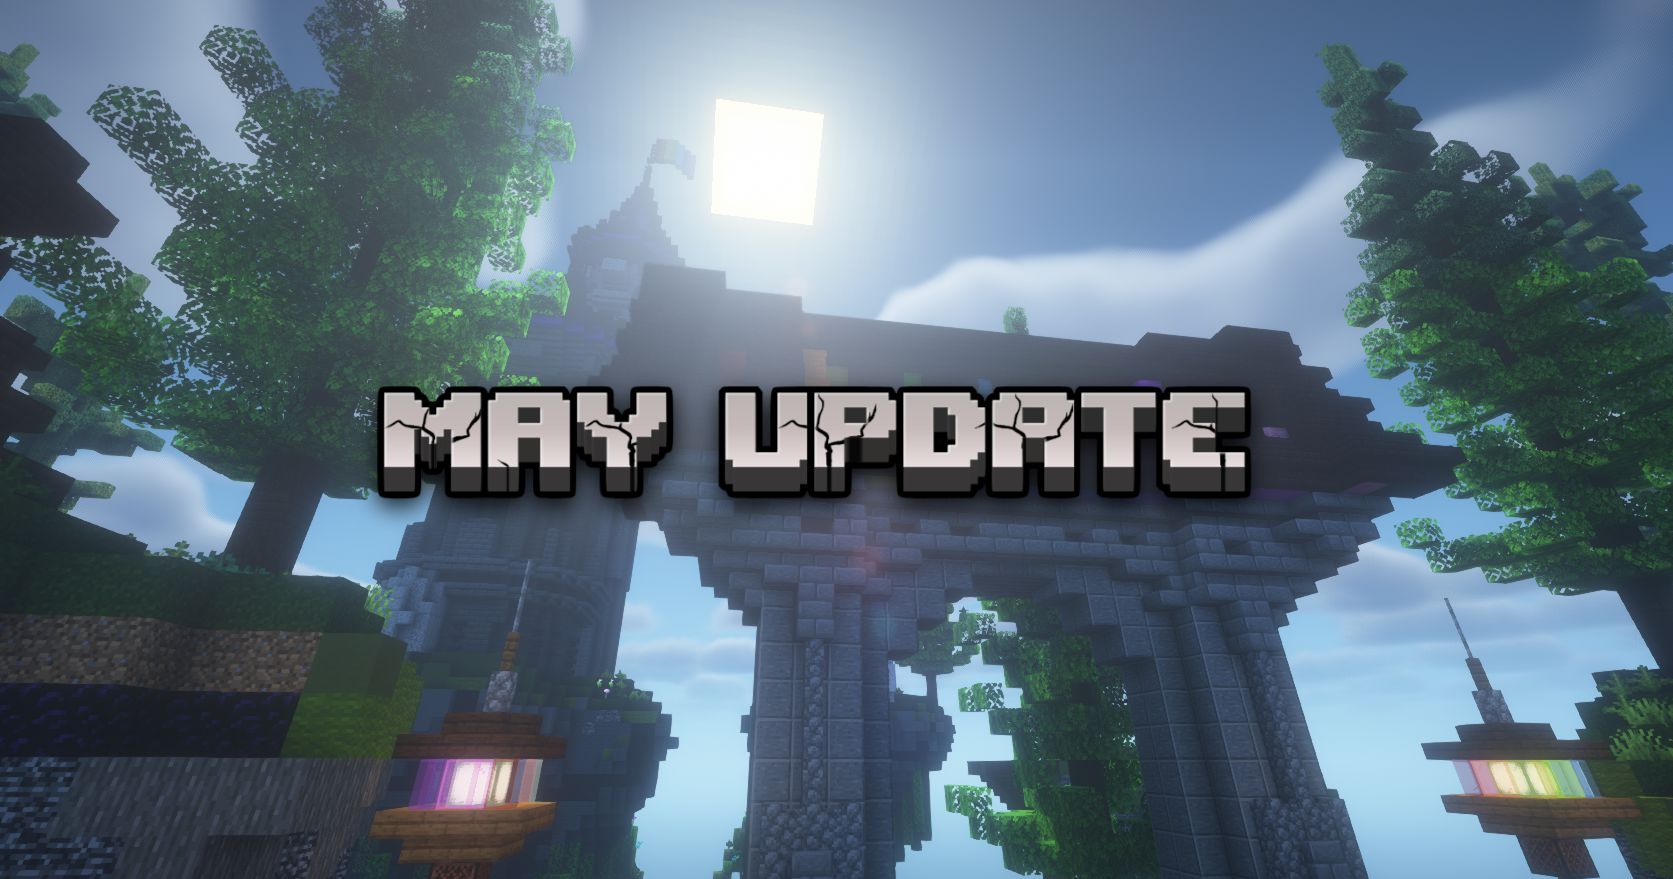 May 31st Update